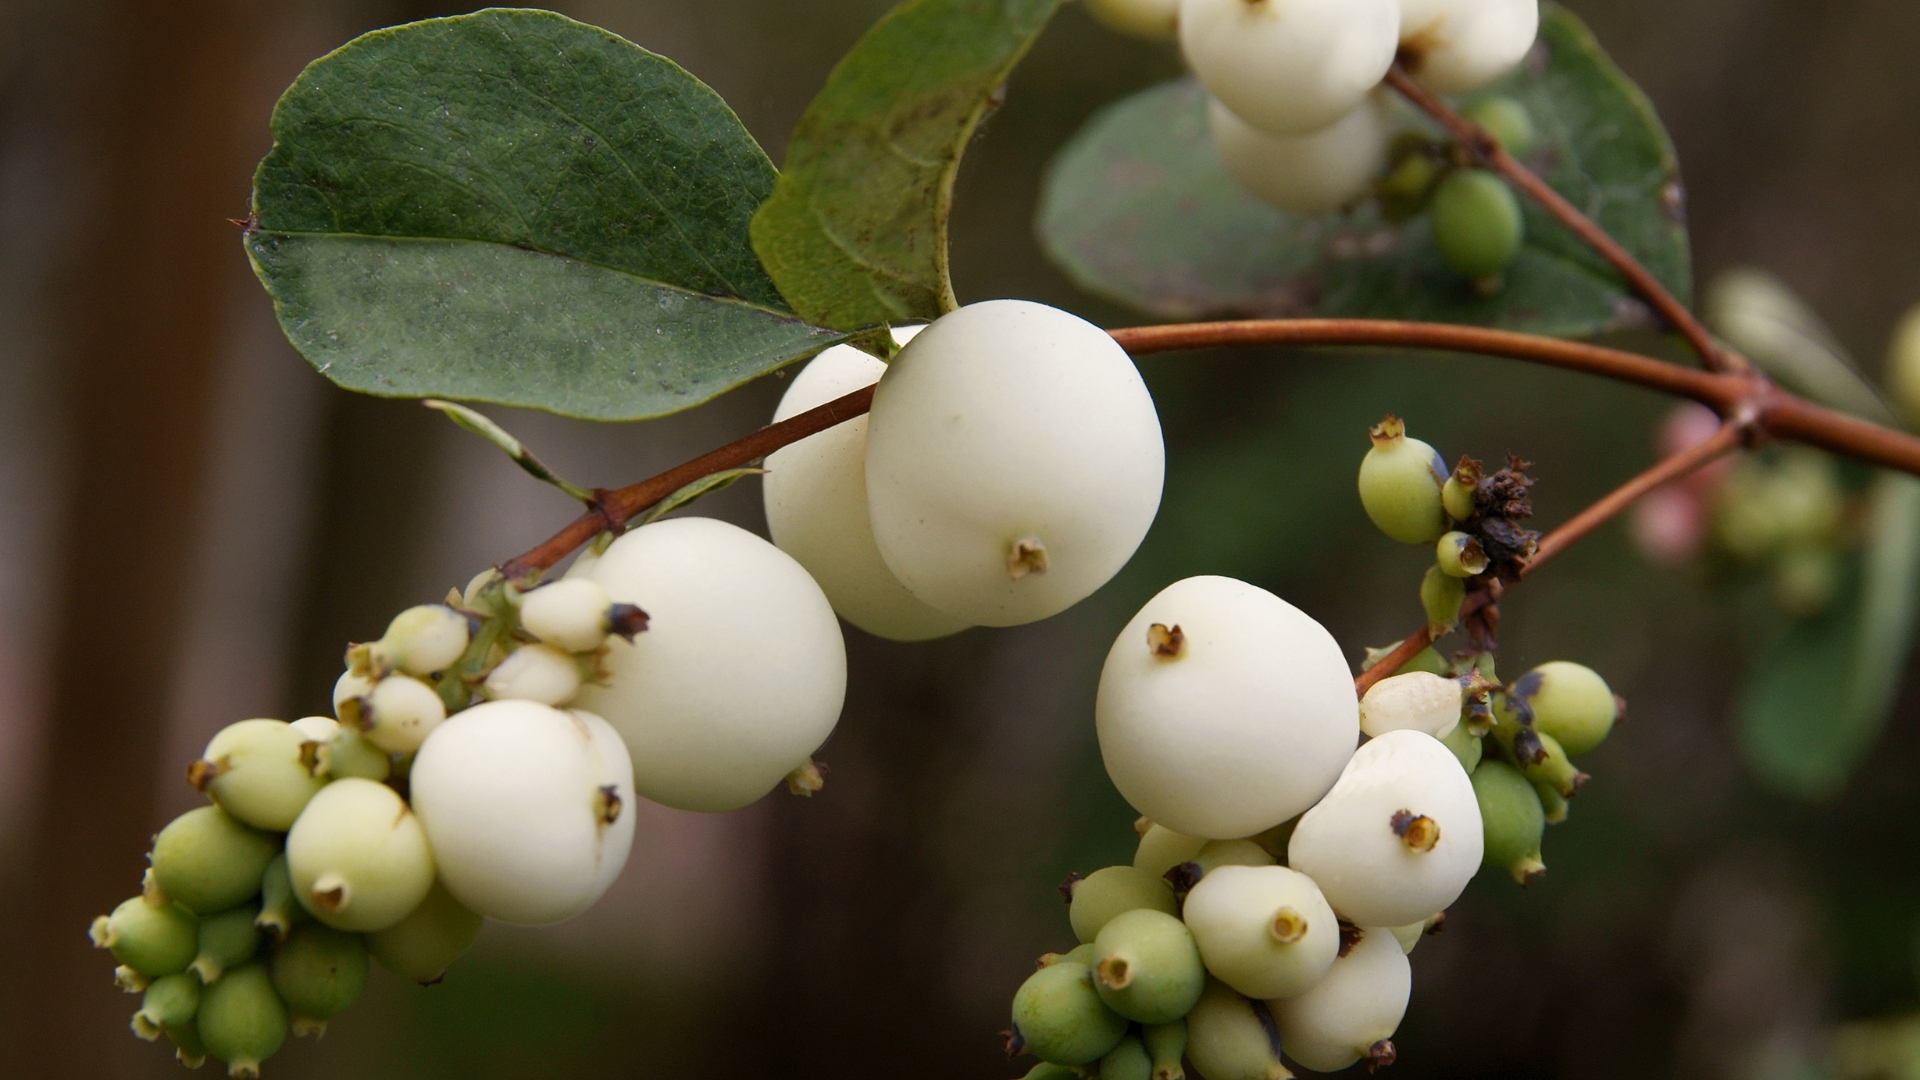 How To Grow And Care For Snowberry Bushes